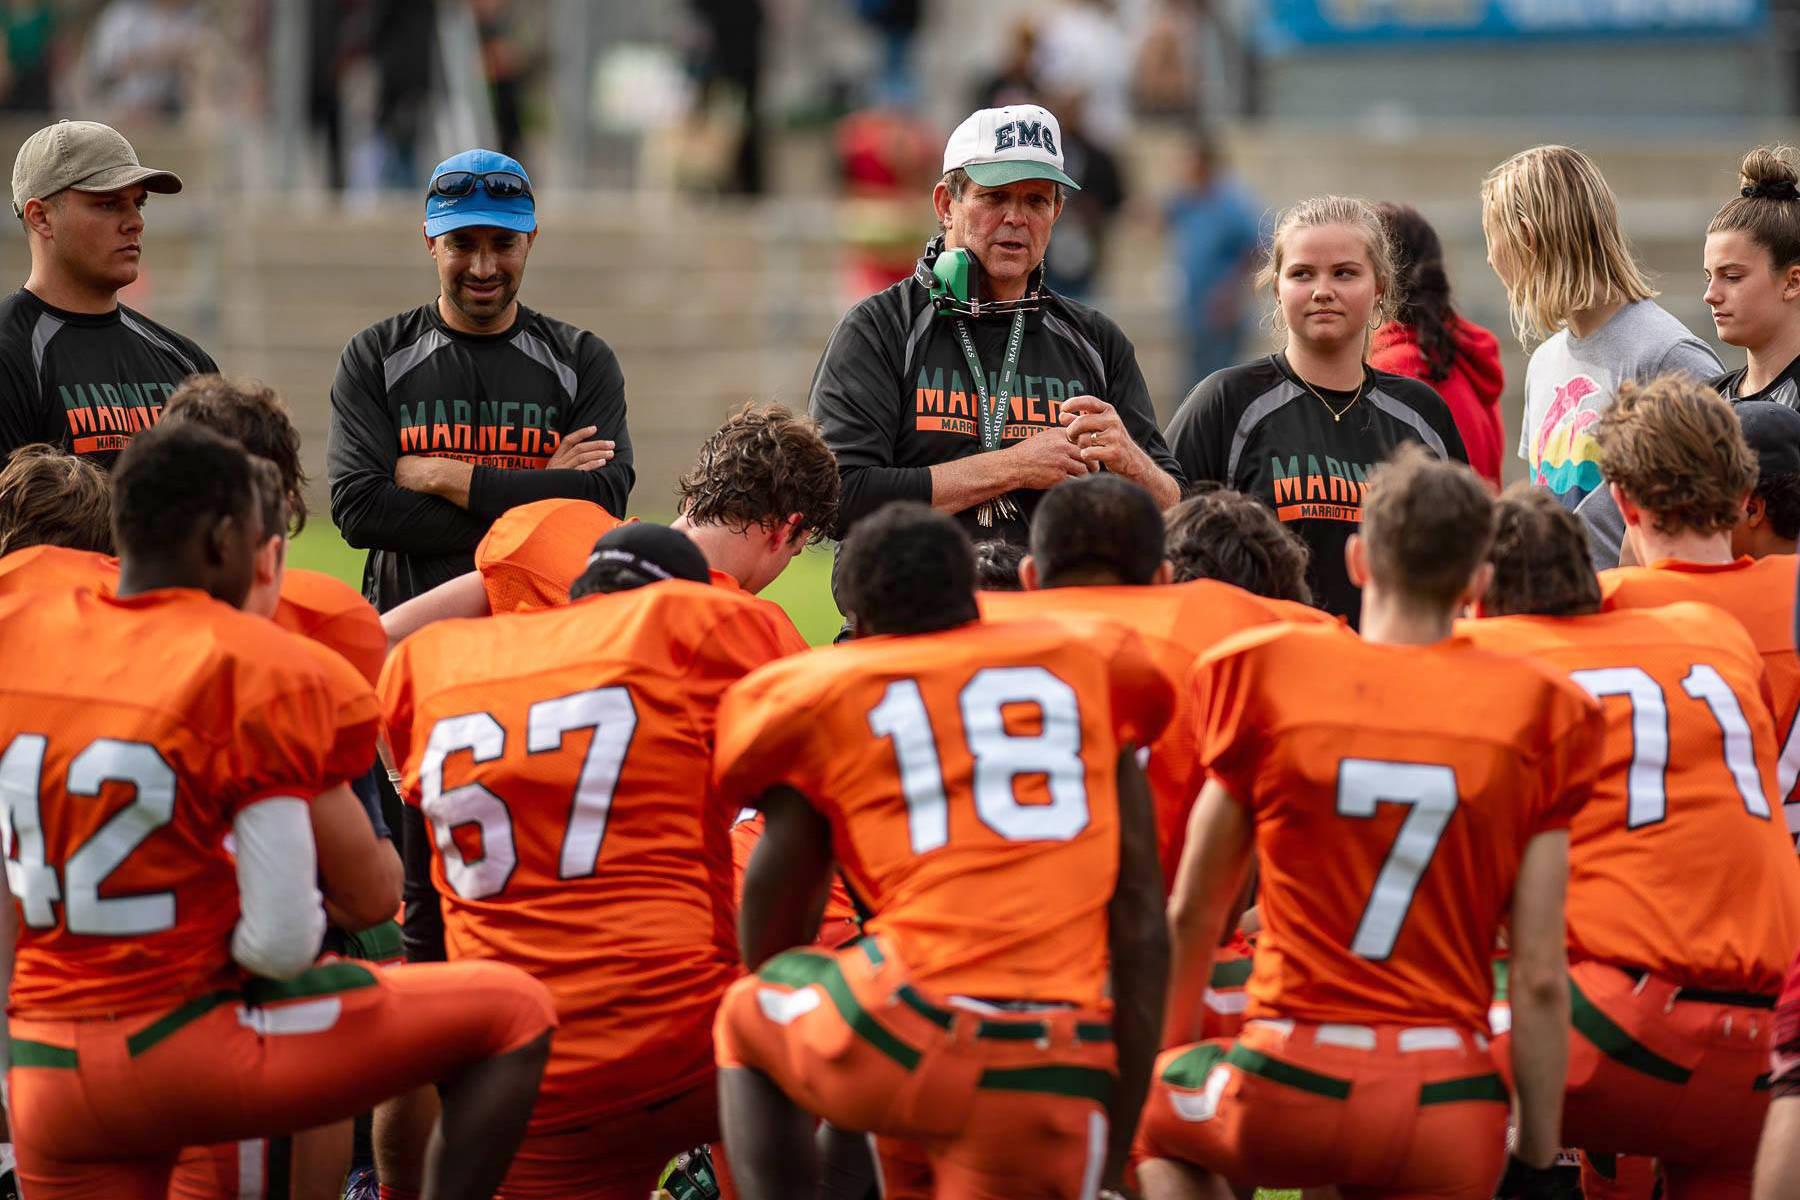 Earl Marriott players, coaches 'energized' by practice-only football season  - Peace Arch News